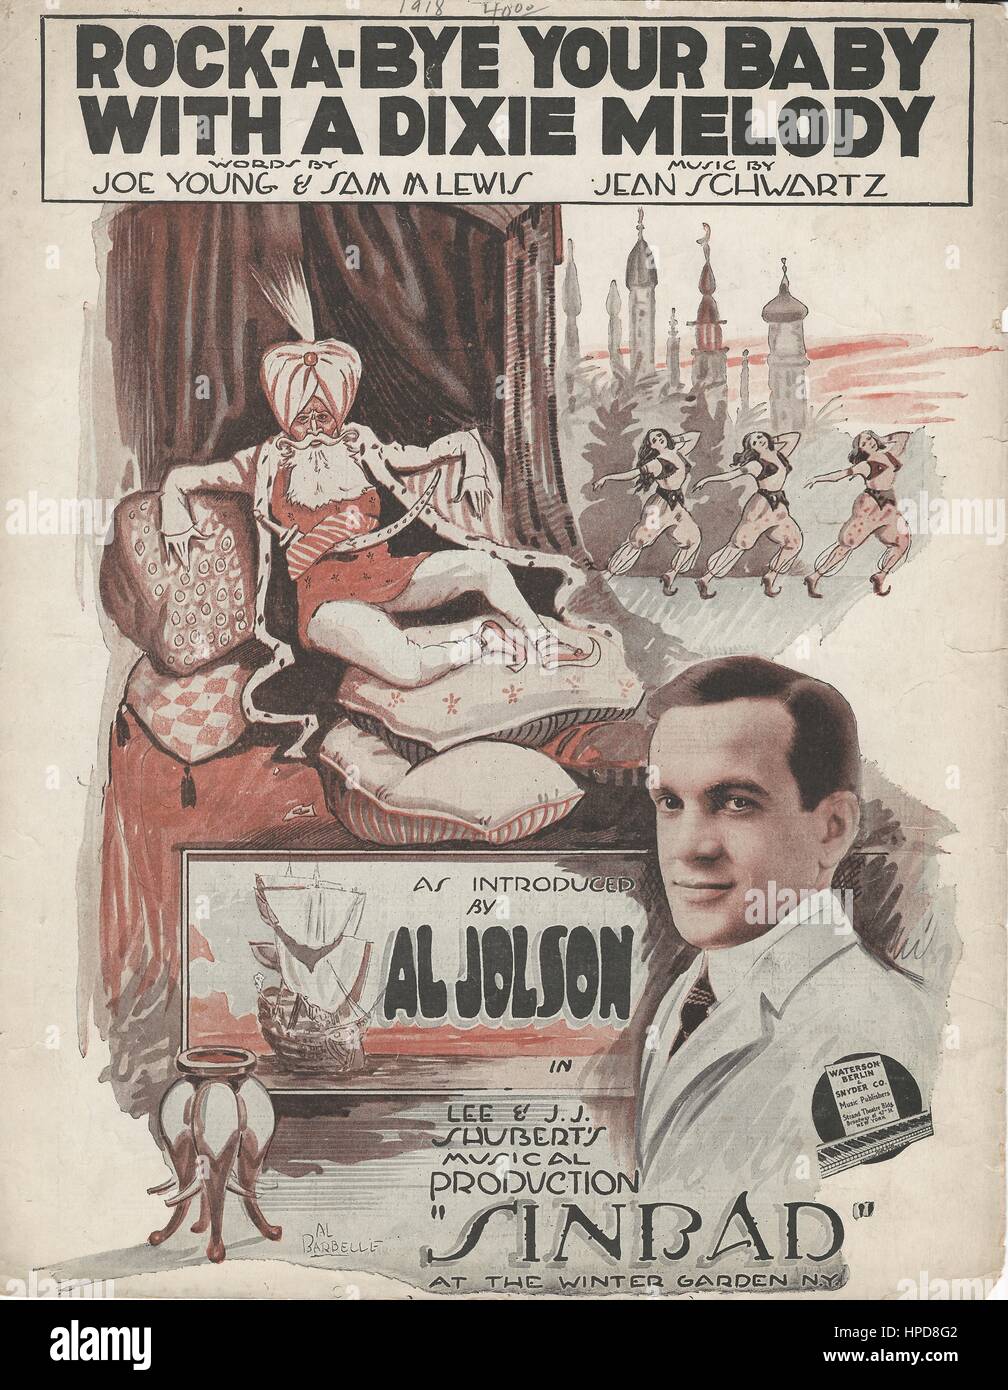 'Rock-a-Bye Your Baby with a Dixie Melody' from the 1918 Al Jolson Musical 'Sinbad' Sheet Music Cover Stock Photo